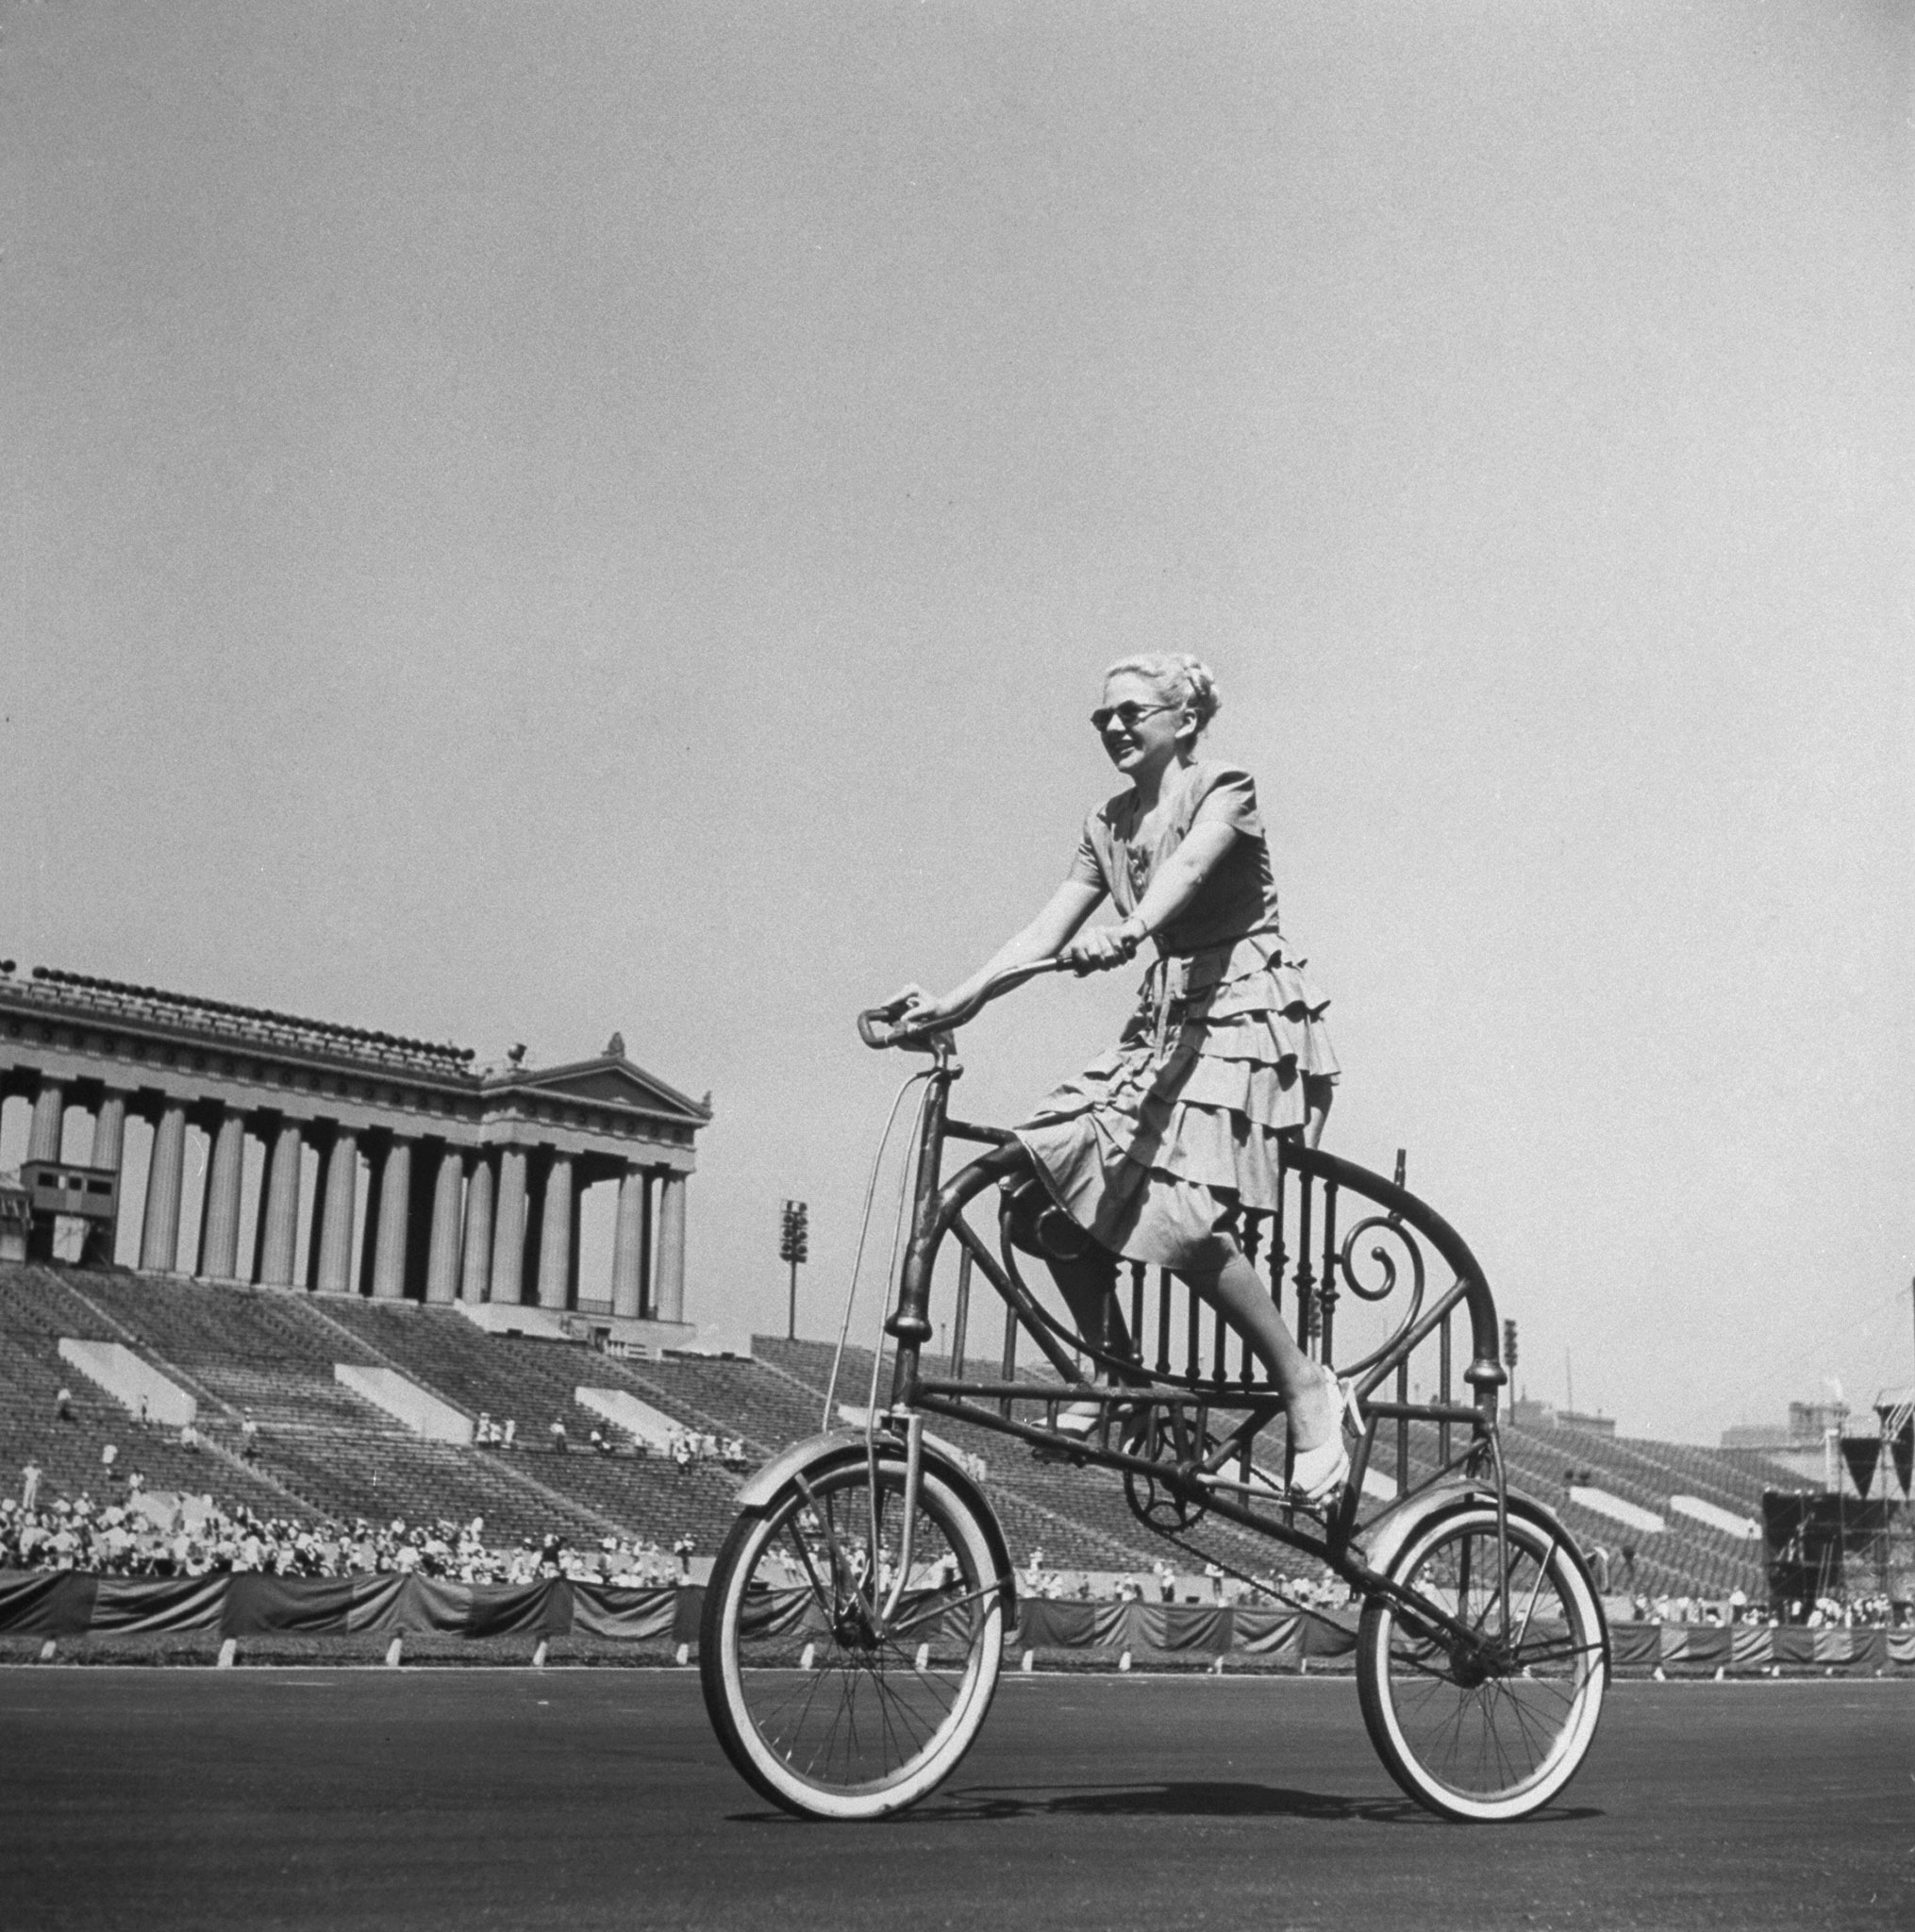 Bicycle inventions in Chicago 1948